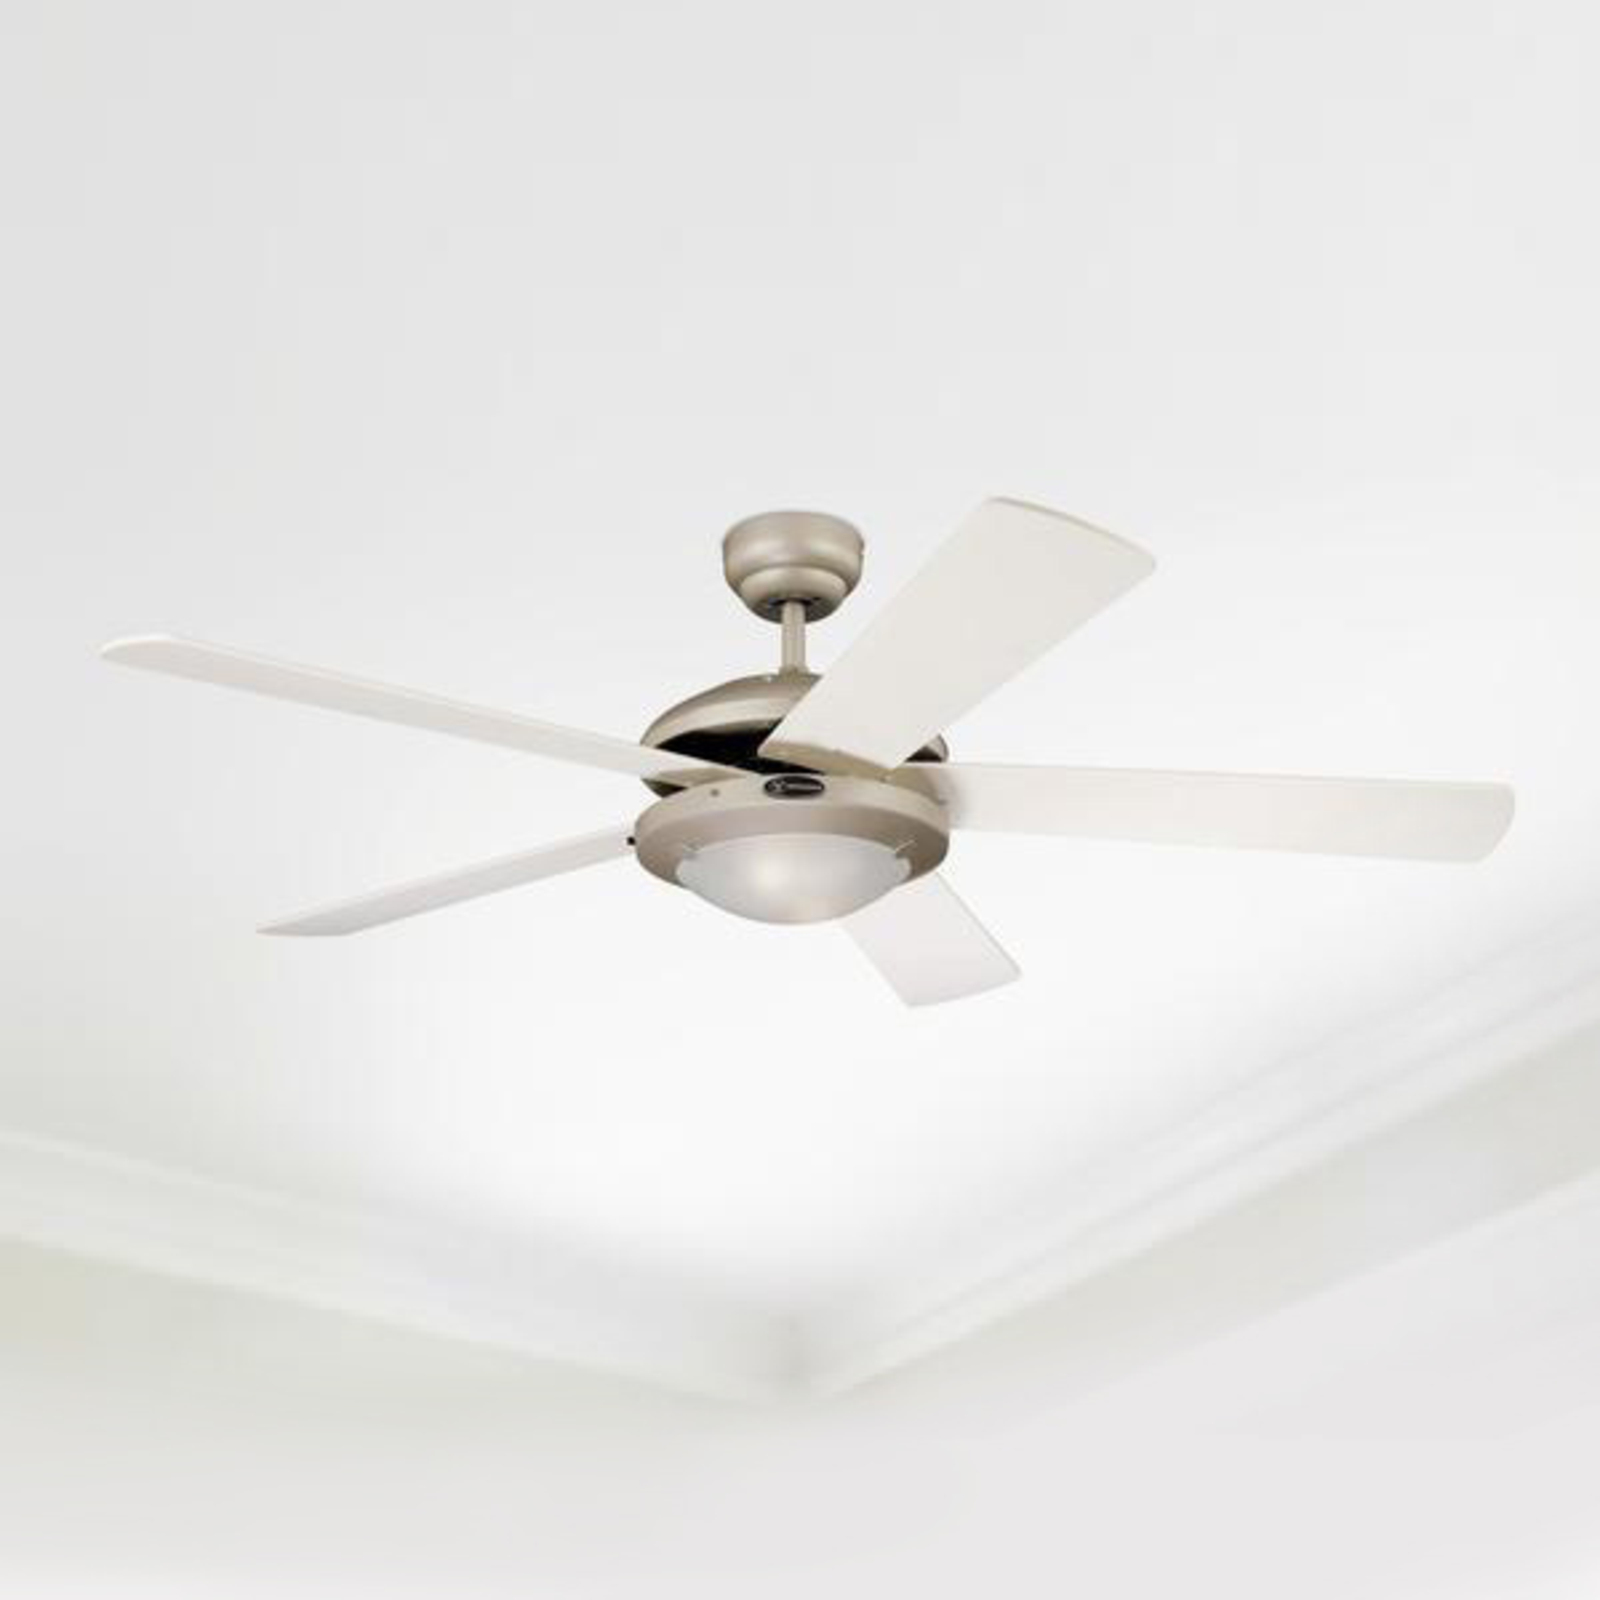 Comet ceiling fan in titanium, white and maple | Lights.co.uk